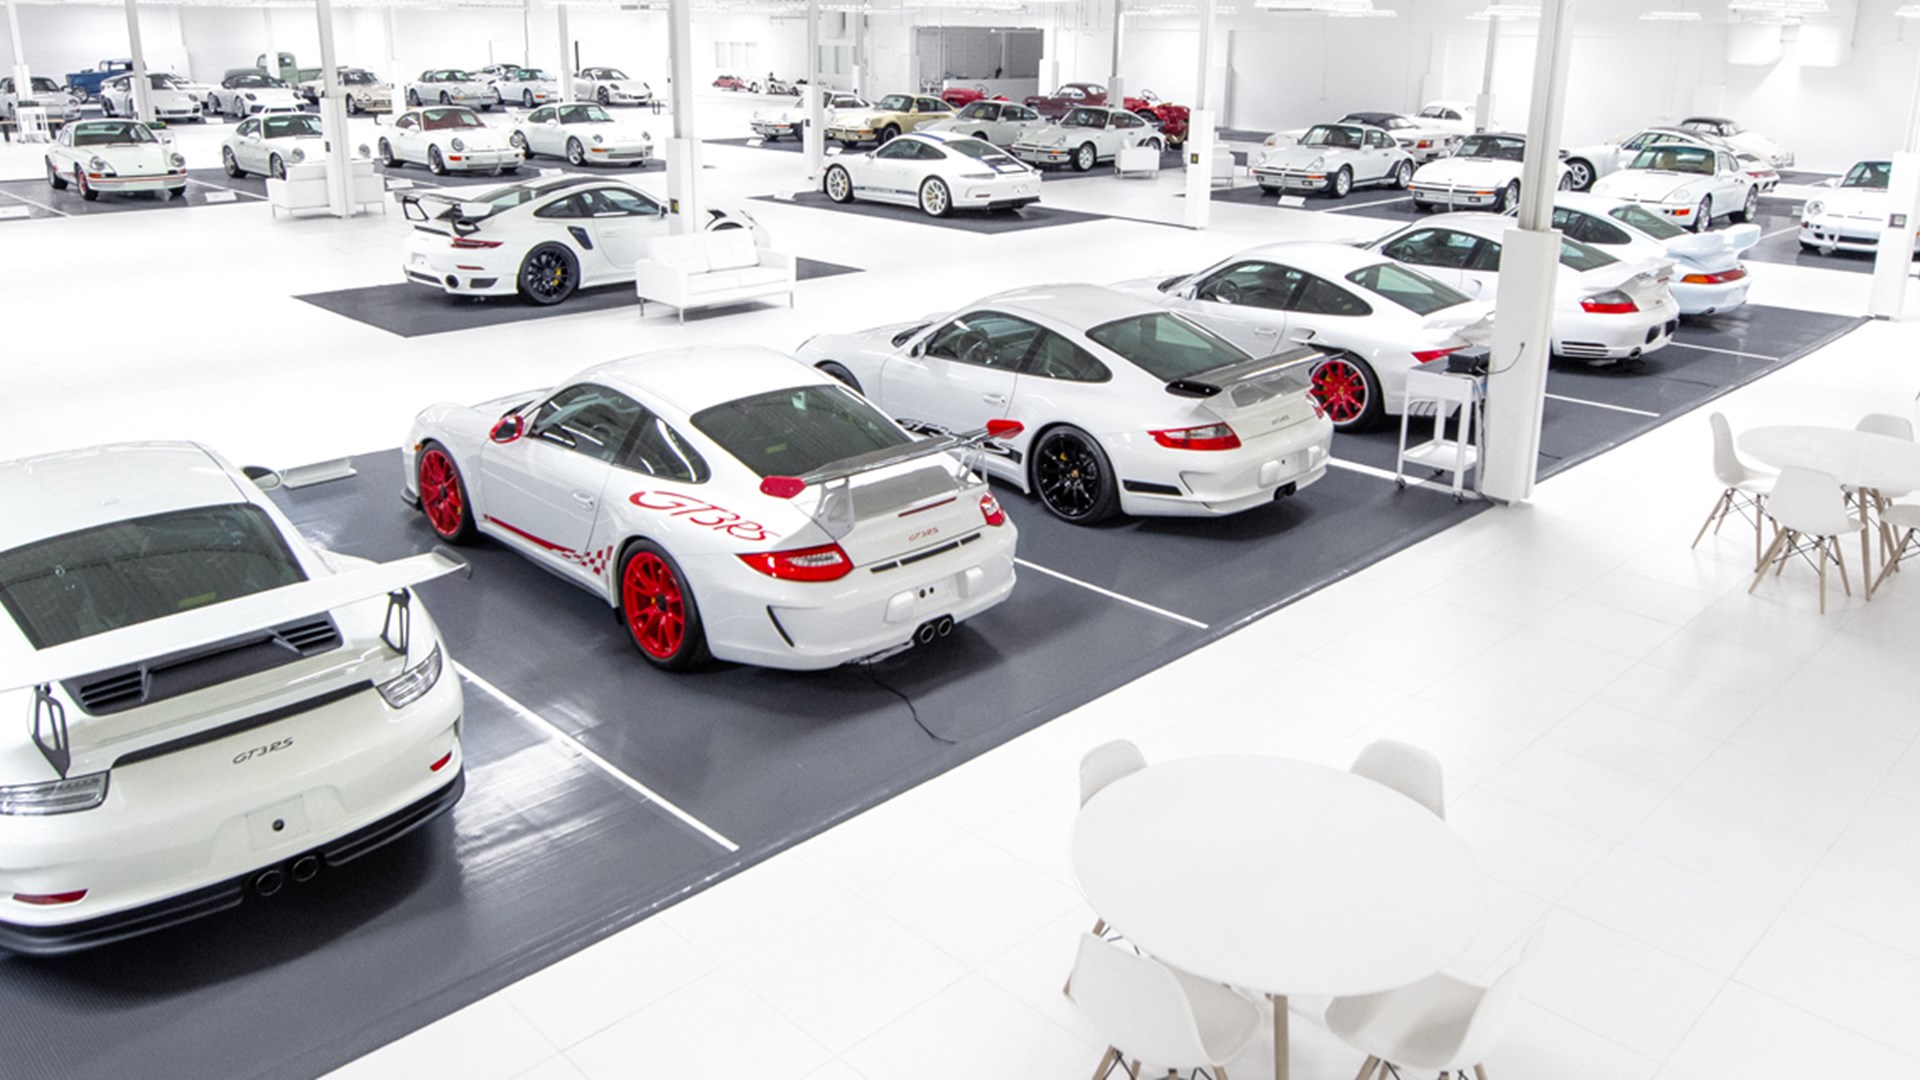 White Collection Of Porsches This 'White Collection' Of 56 Porsche Supercars Is Up For